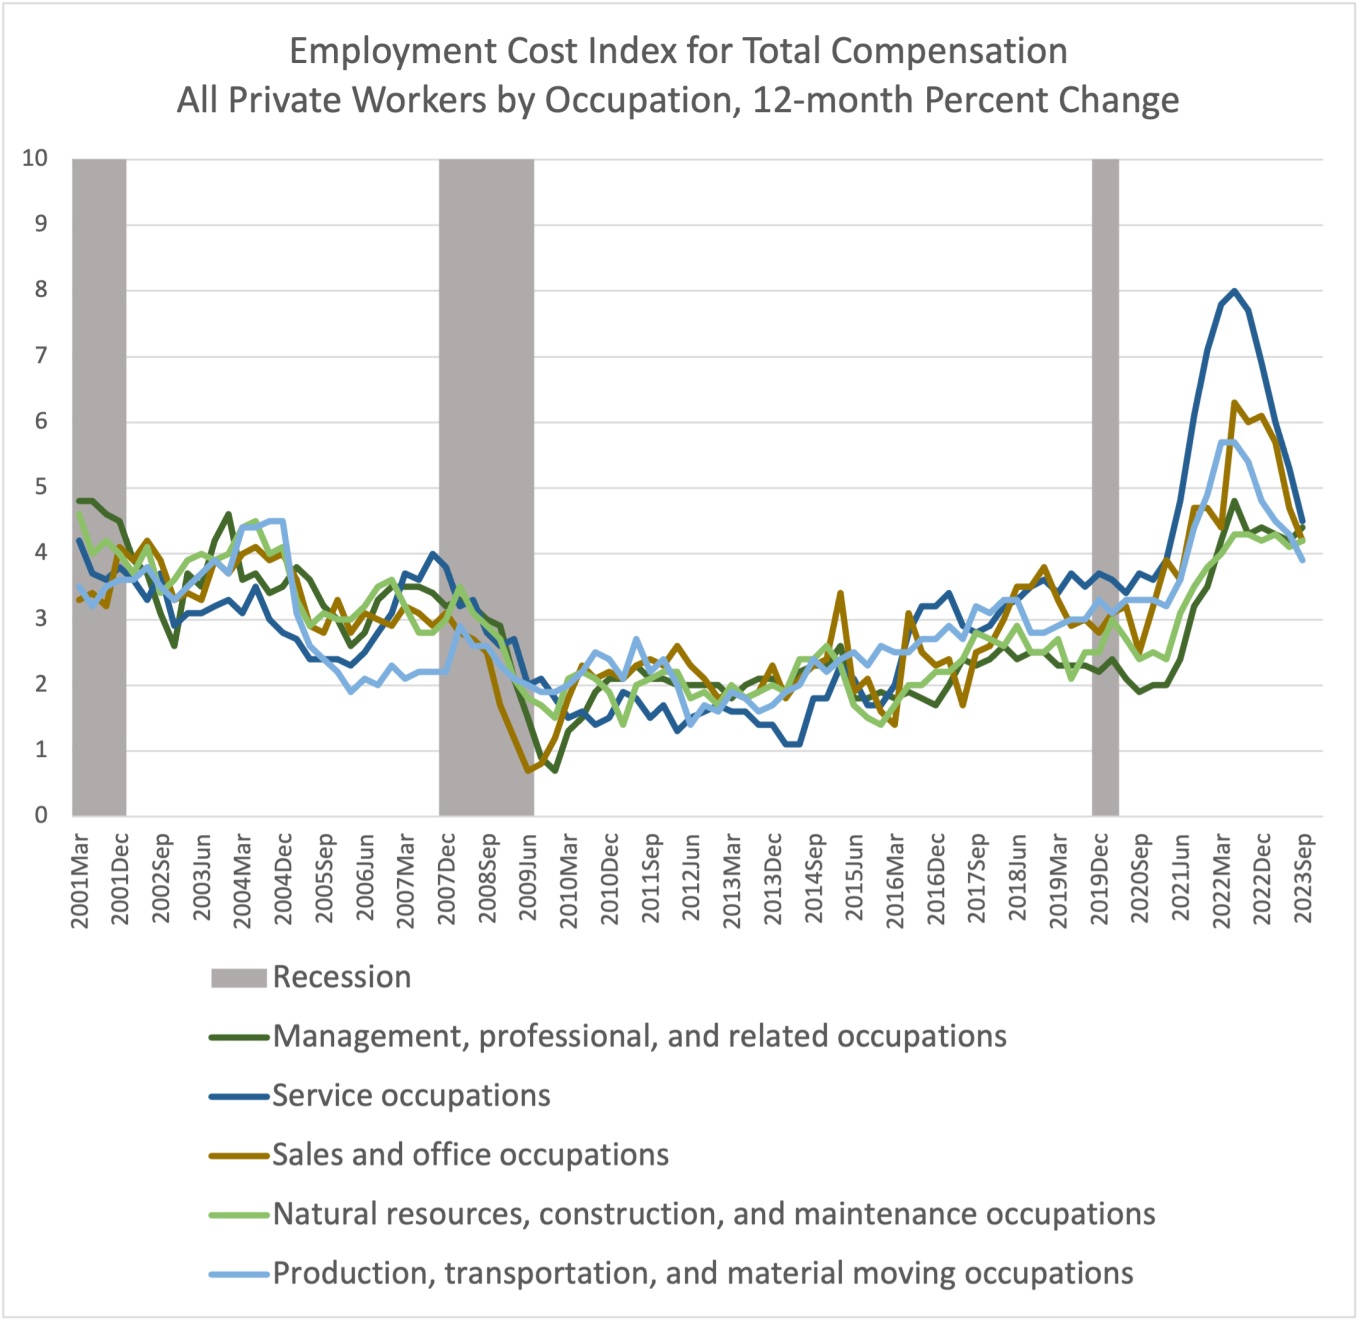 ECI 23Q3 Total Comp, all private workers by occupation, 12m change